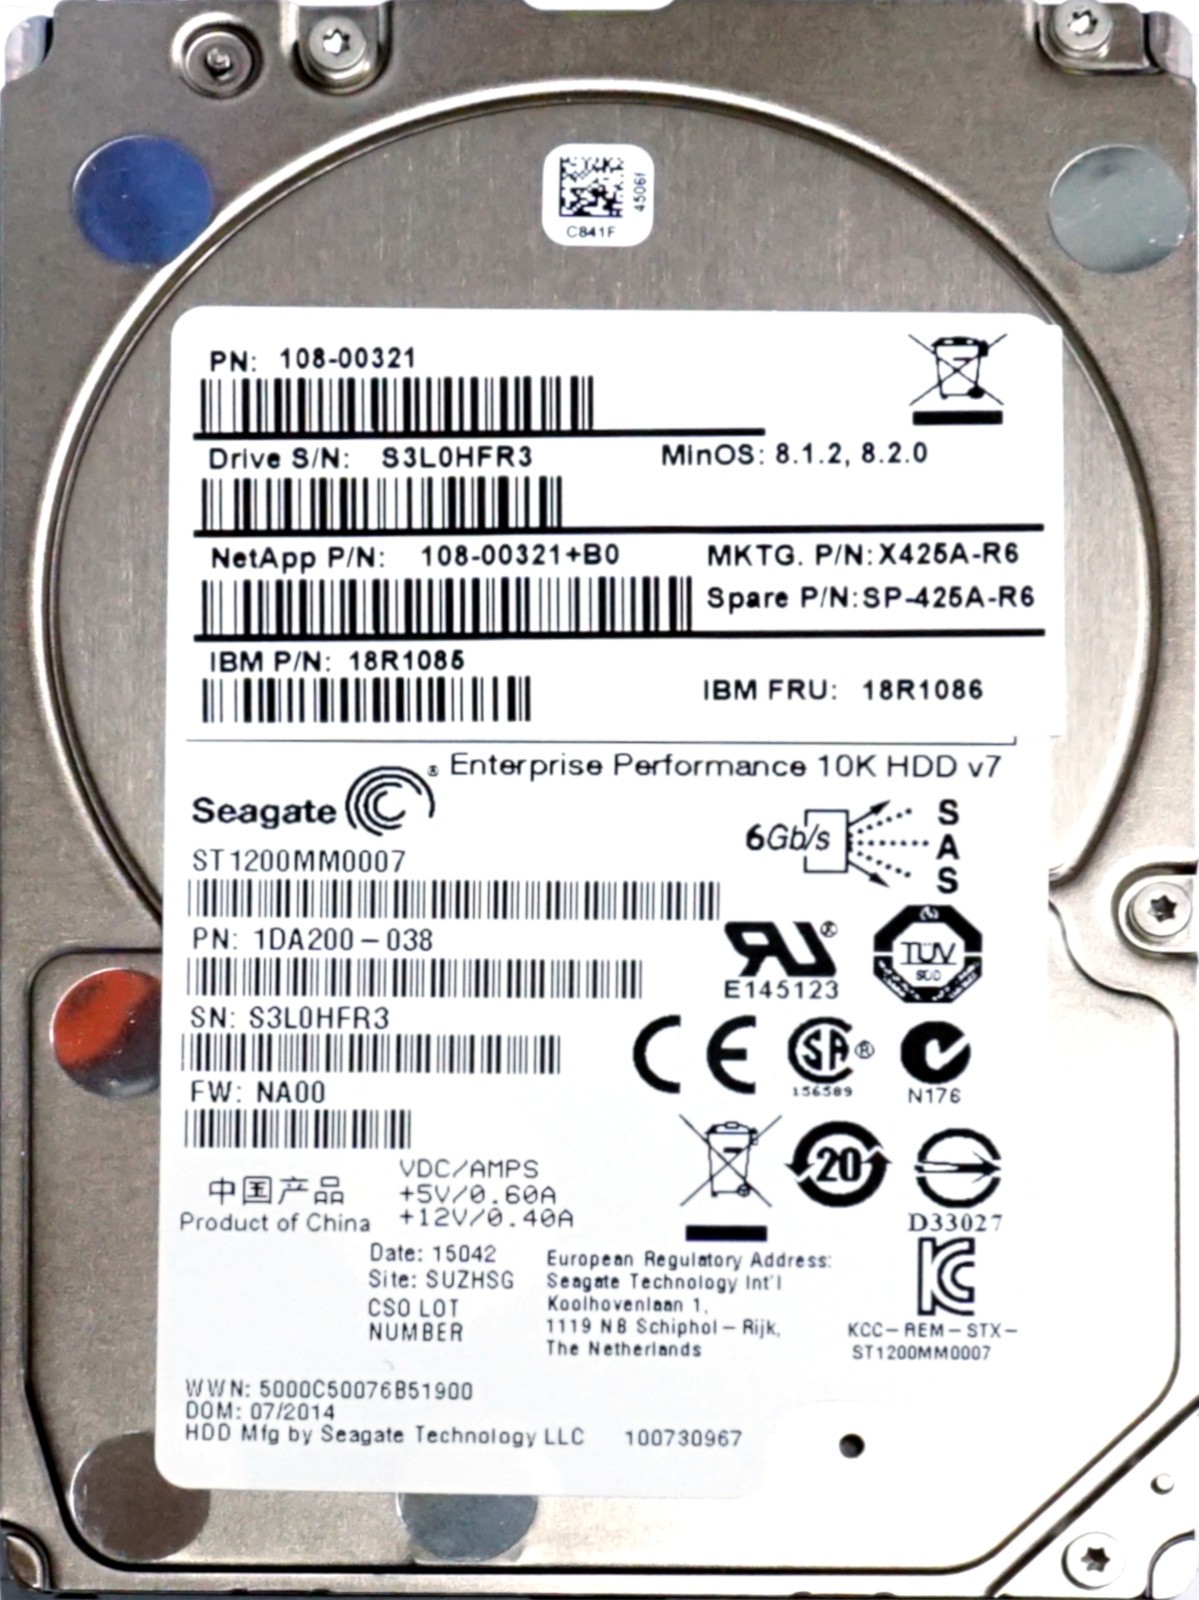 Seagate (ST1200MM0007) 1.2TB SAS-2 (SFF 2.5") 6Gbps 10K HDD